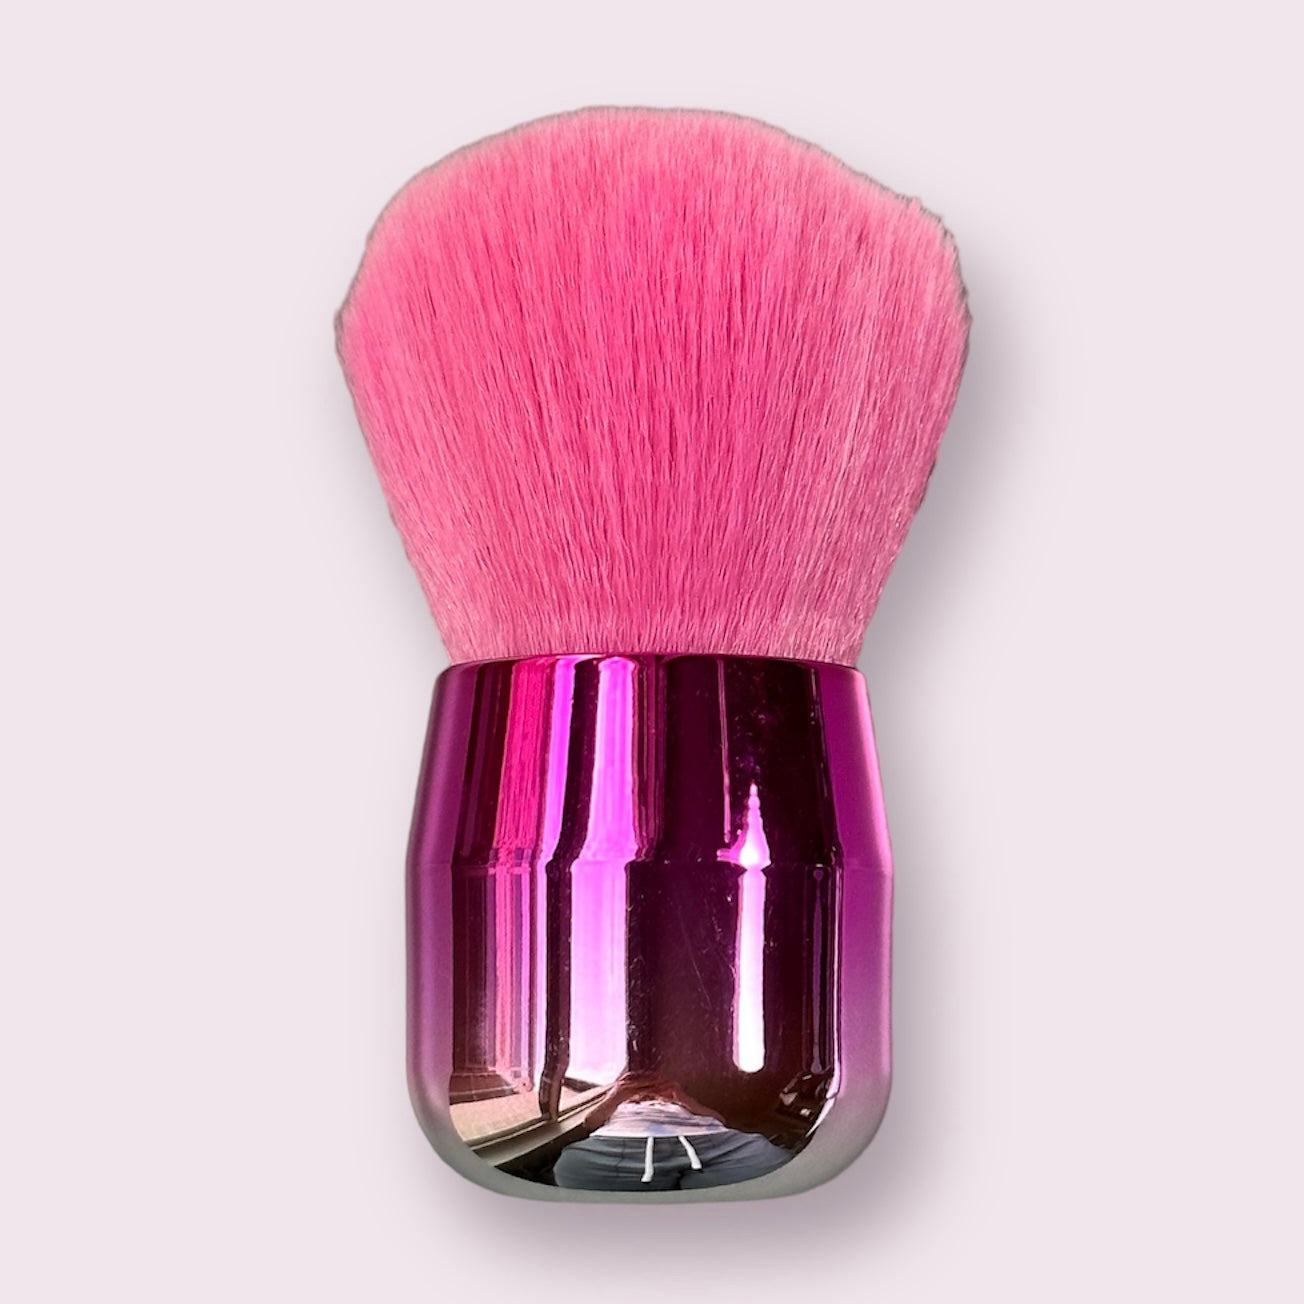 Brush for nail dust, 1pc, ombré silver/pink